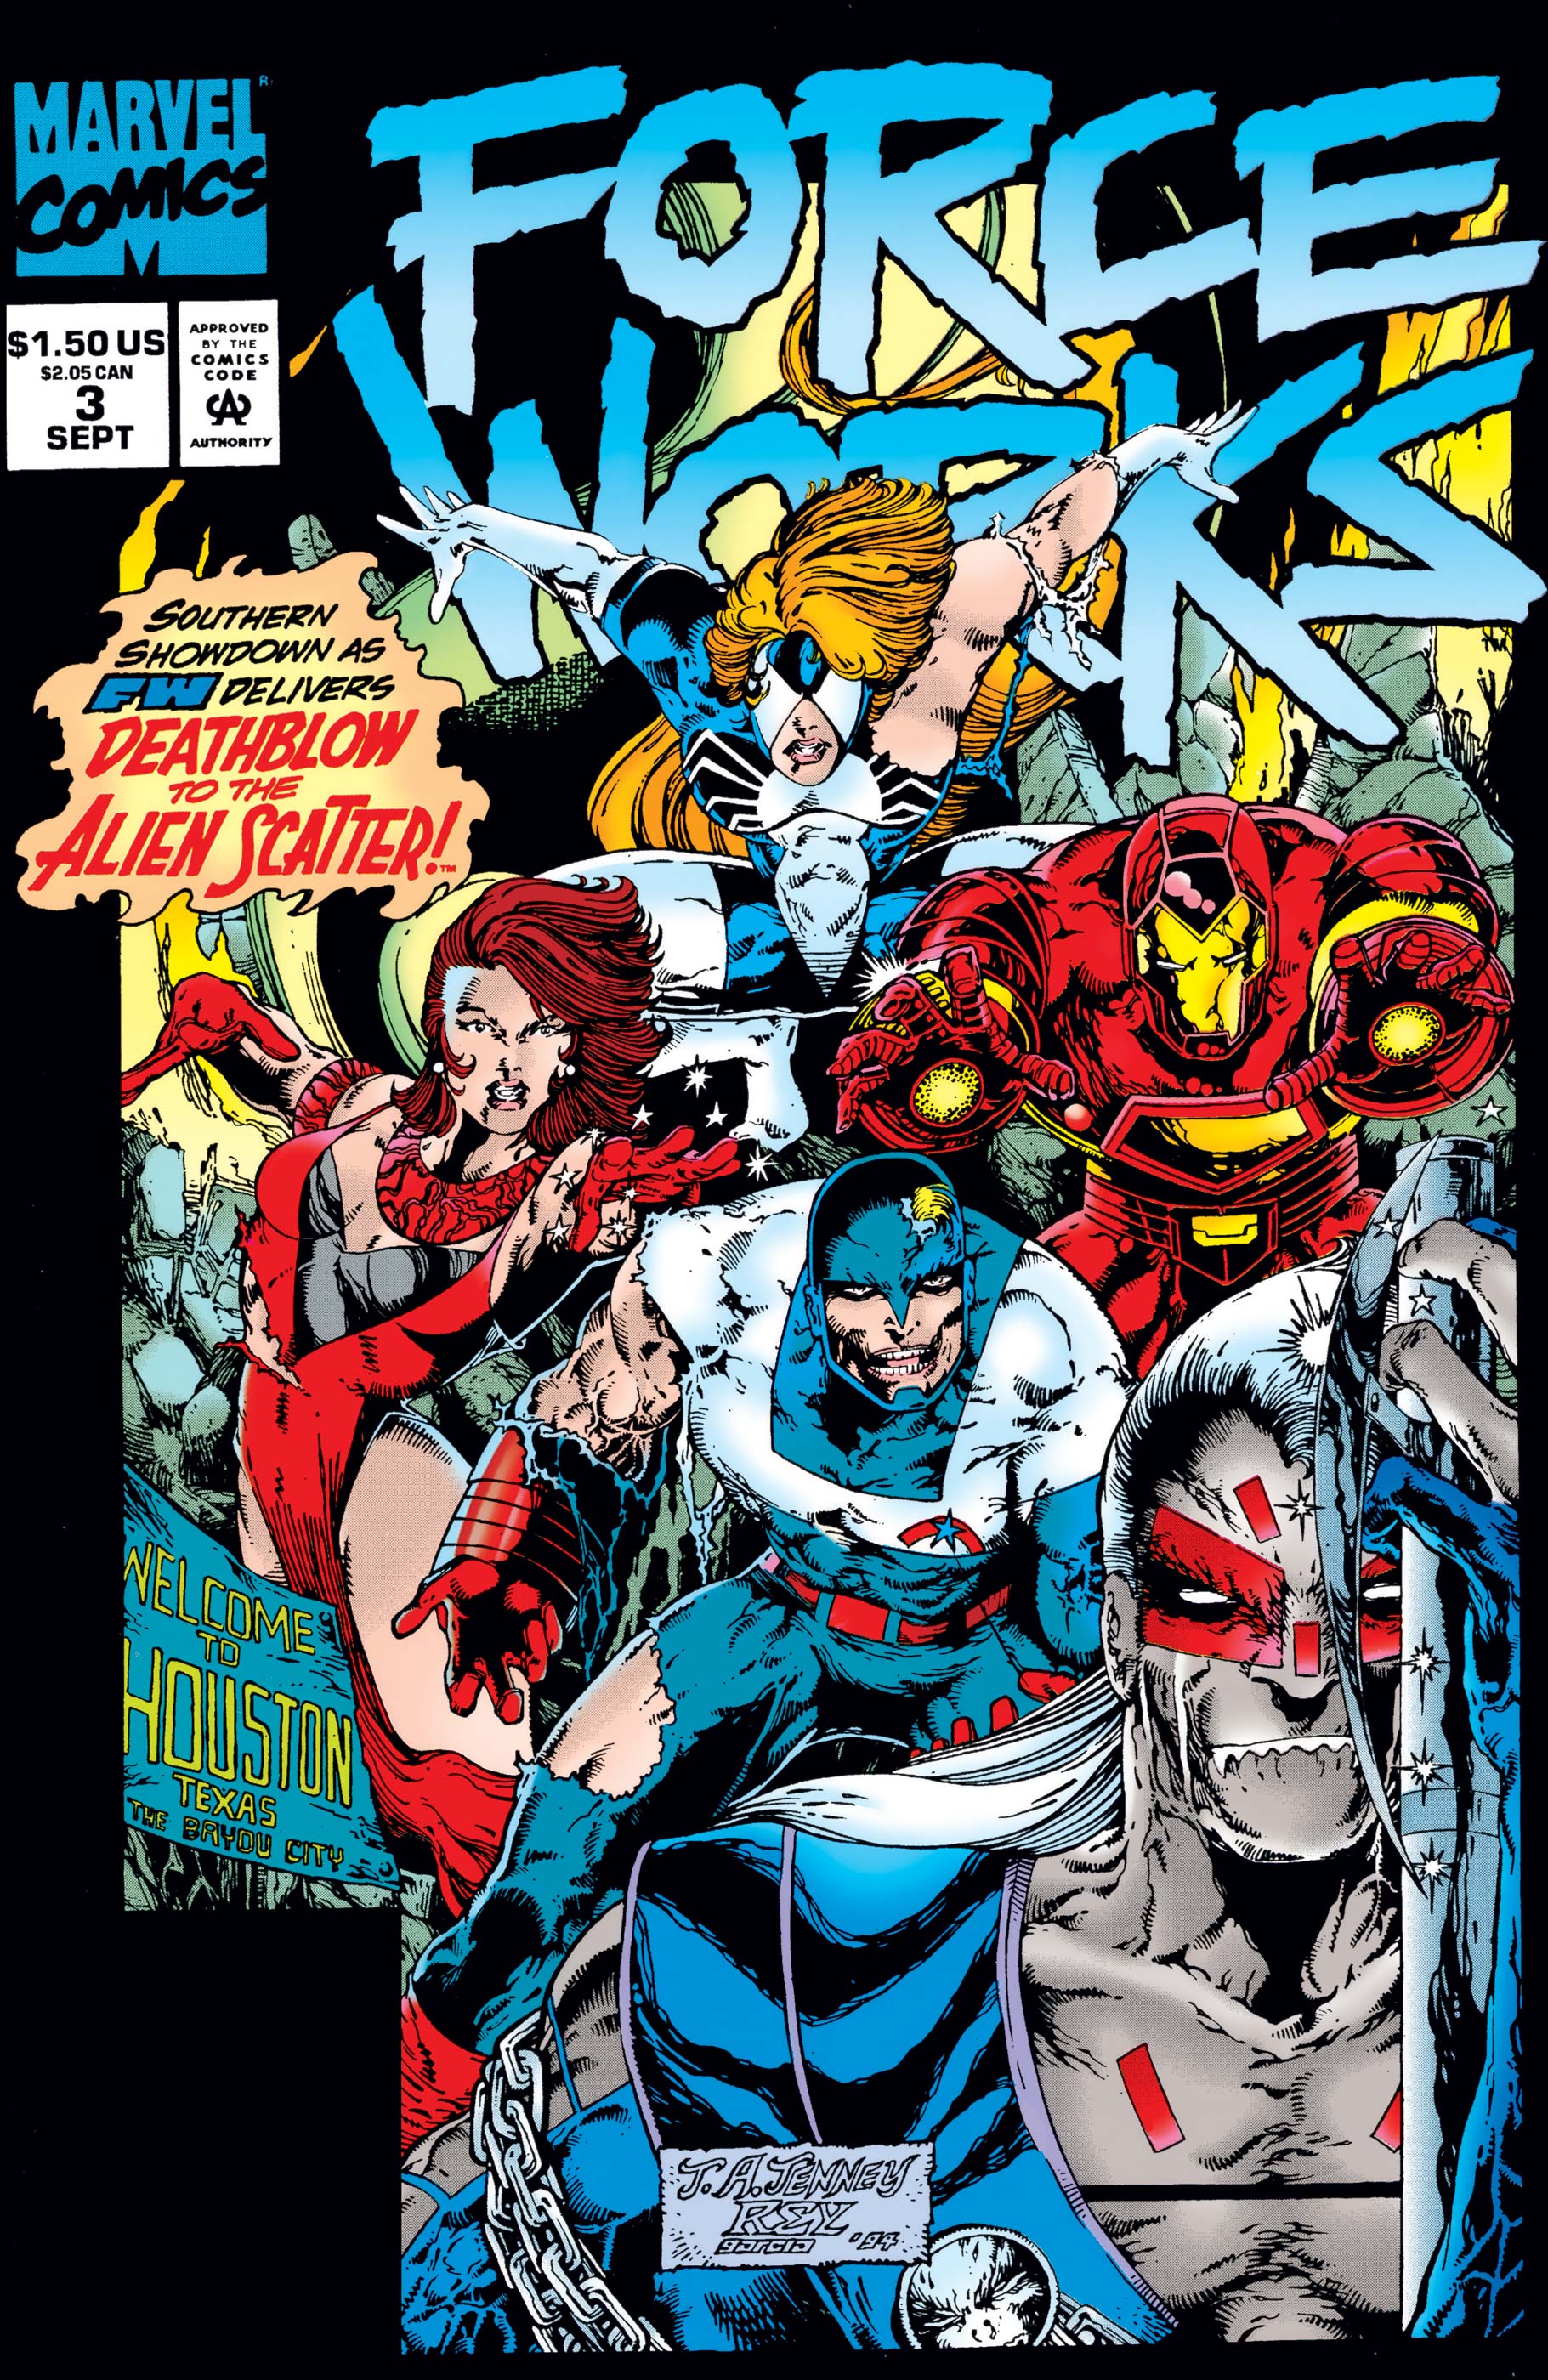 Force Works (1994) #3 | Comic Issues | Marvel